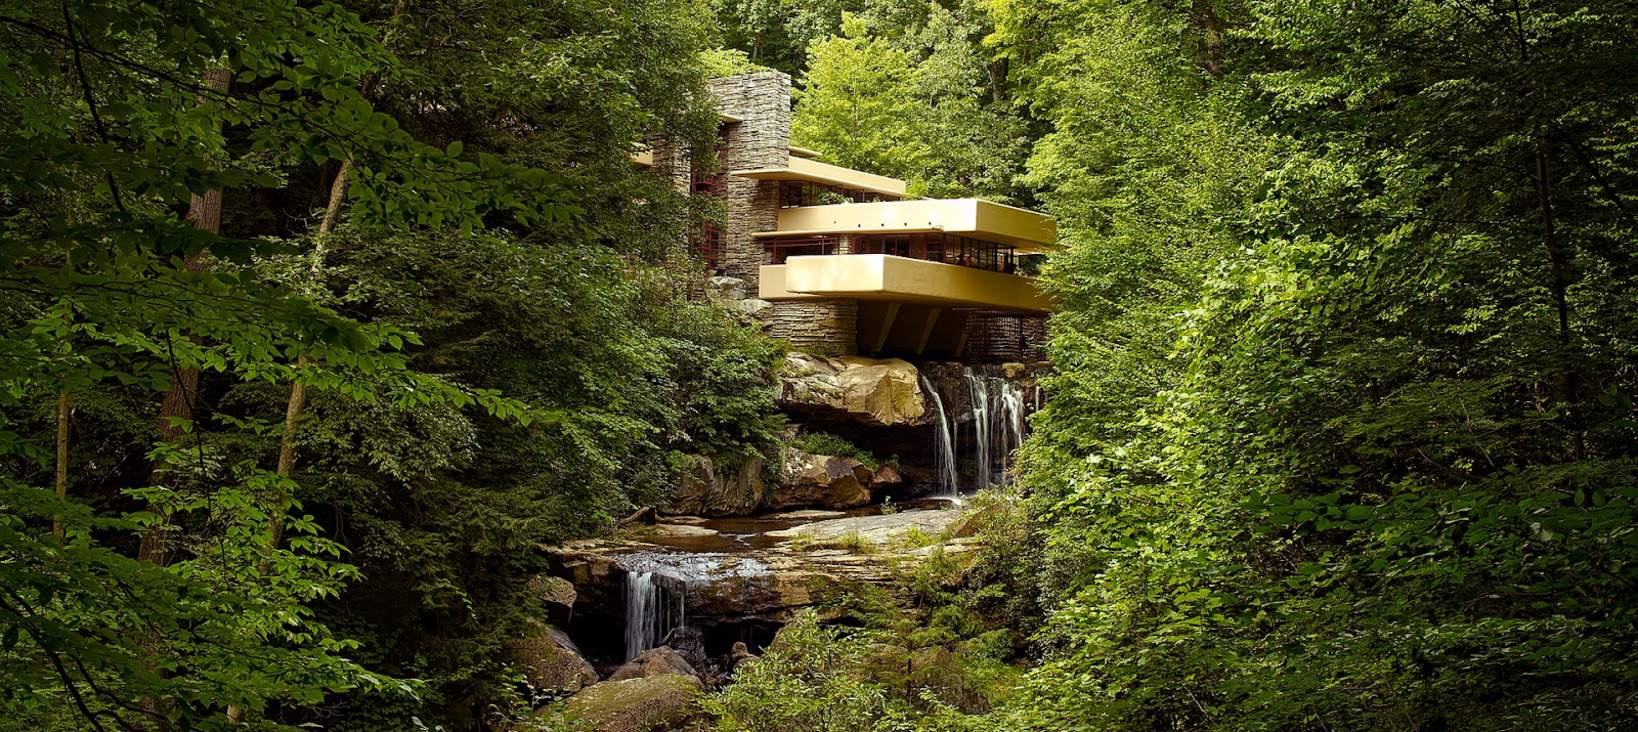 A photo of a building in a forest above a waterfall